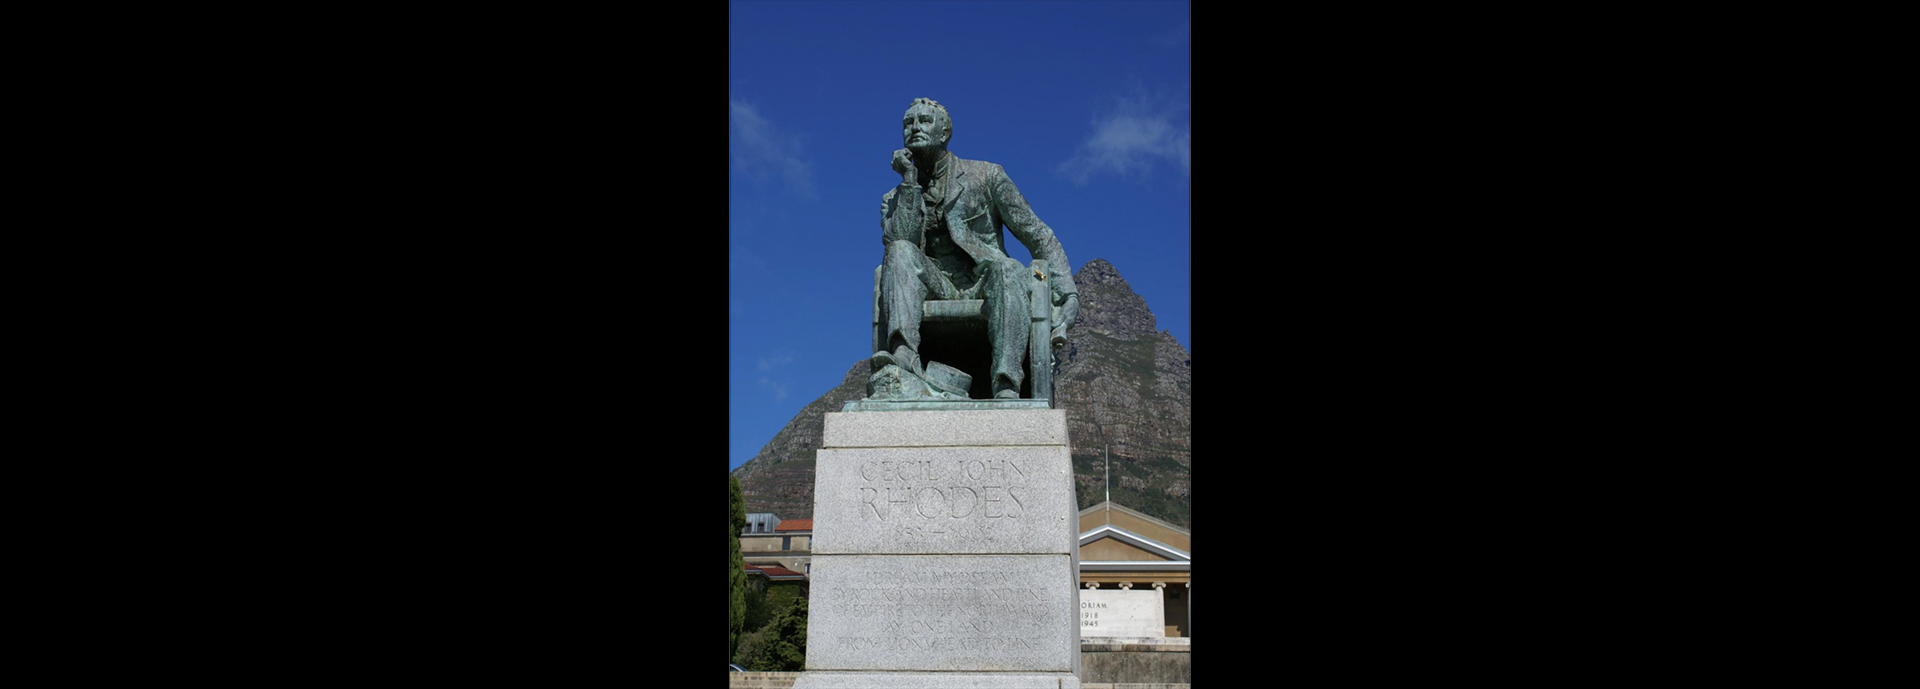 After the #fall: The shadow of Cecil Rhodes at the University of Capetown